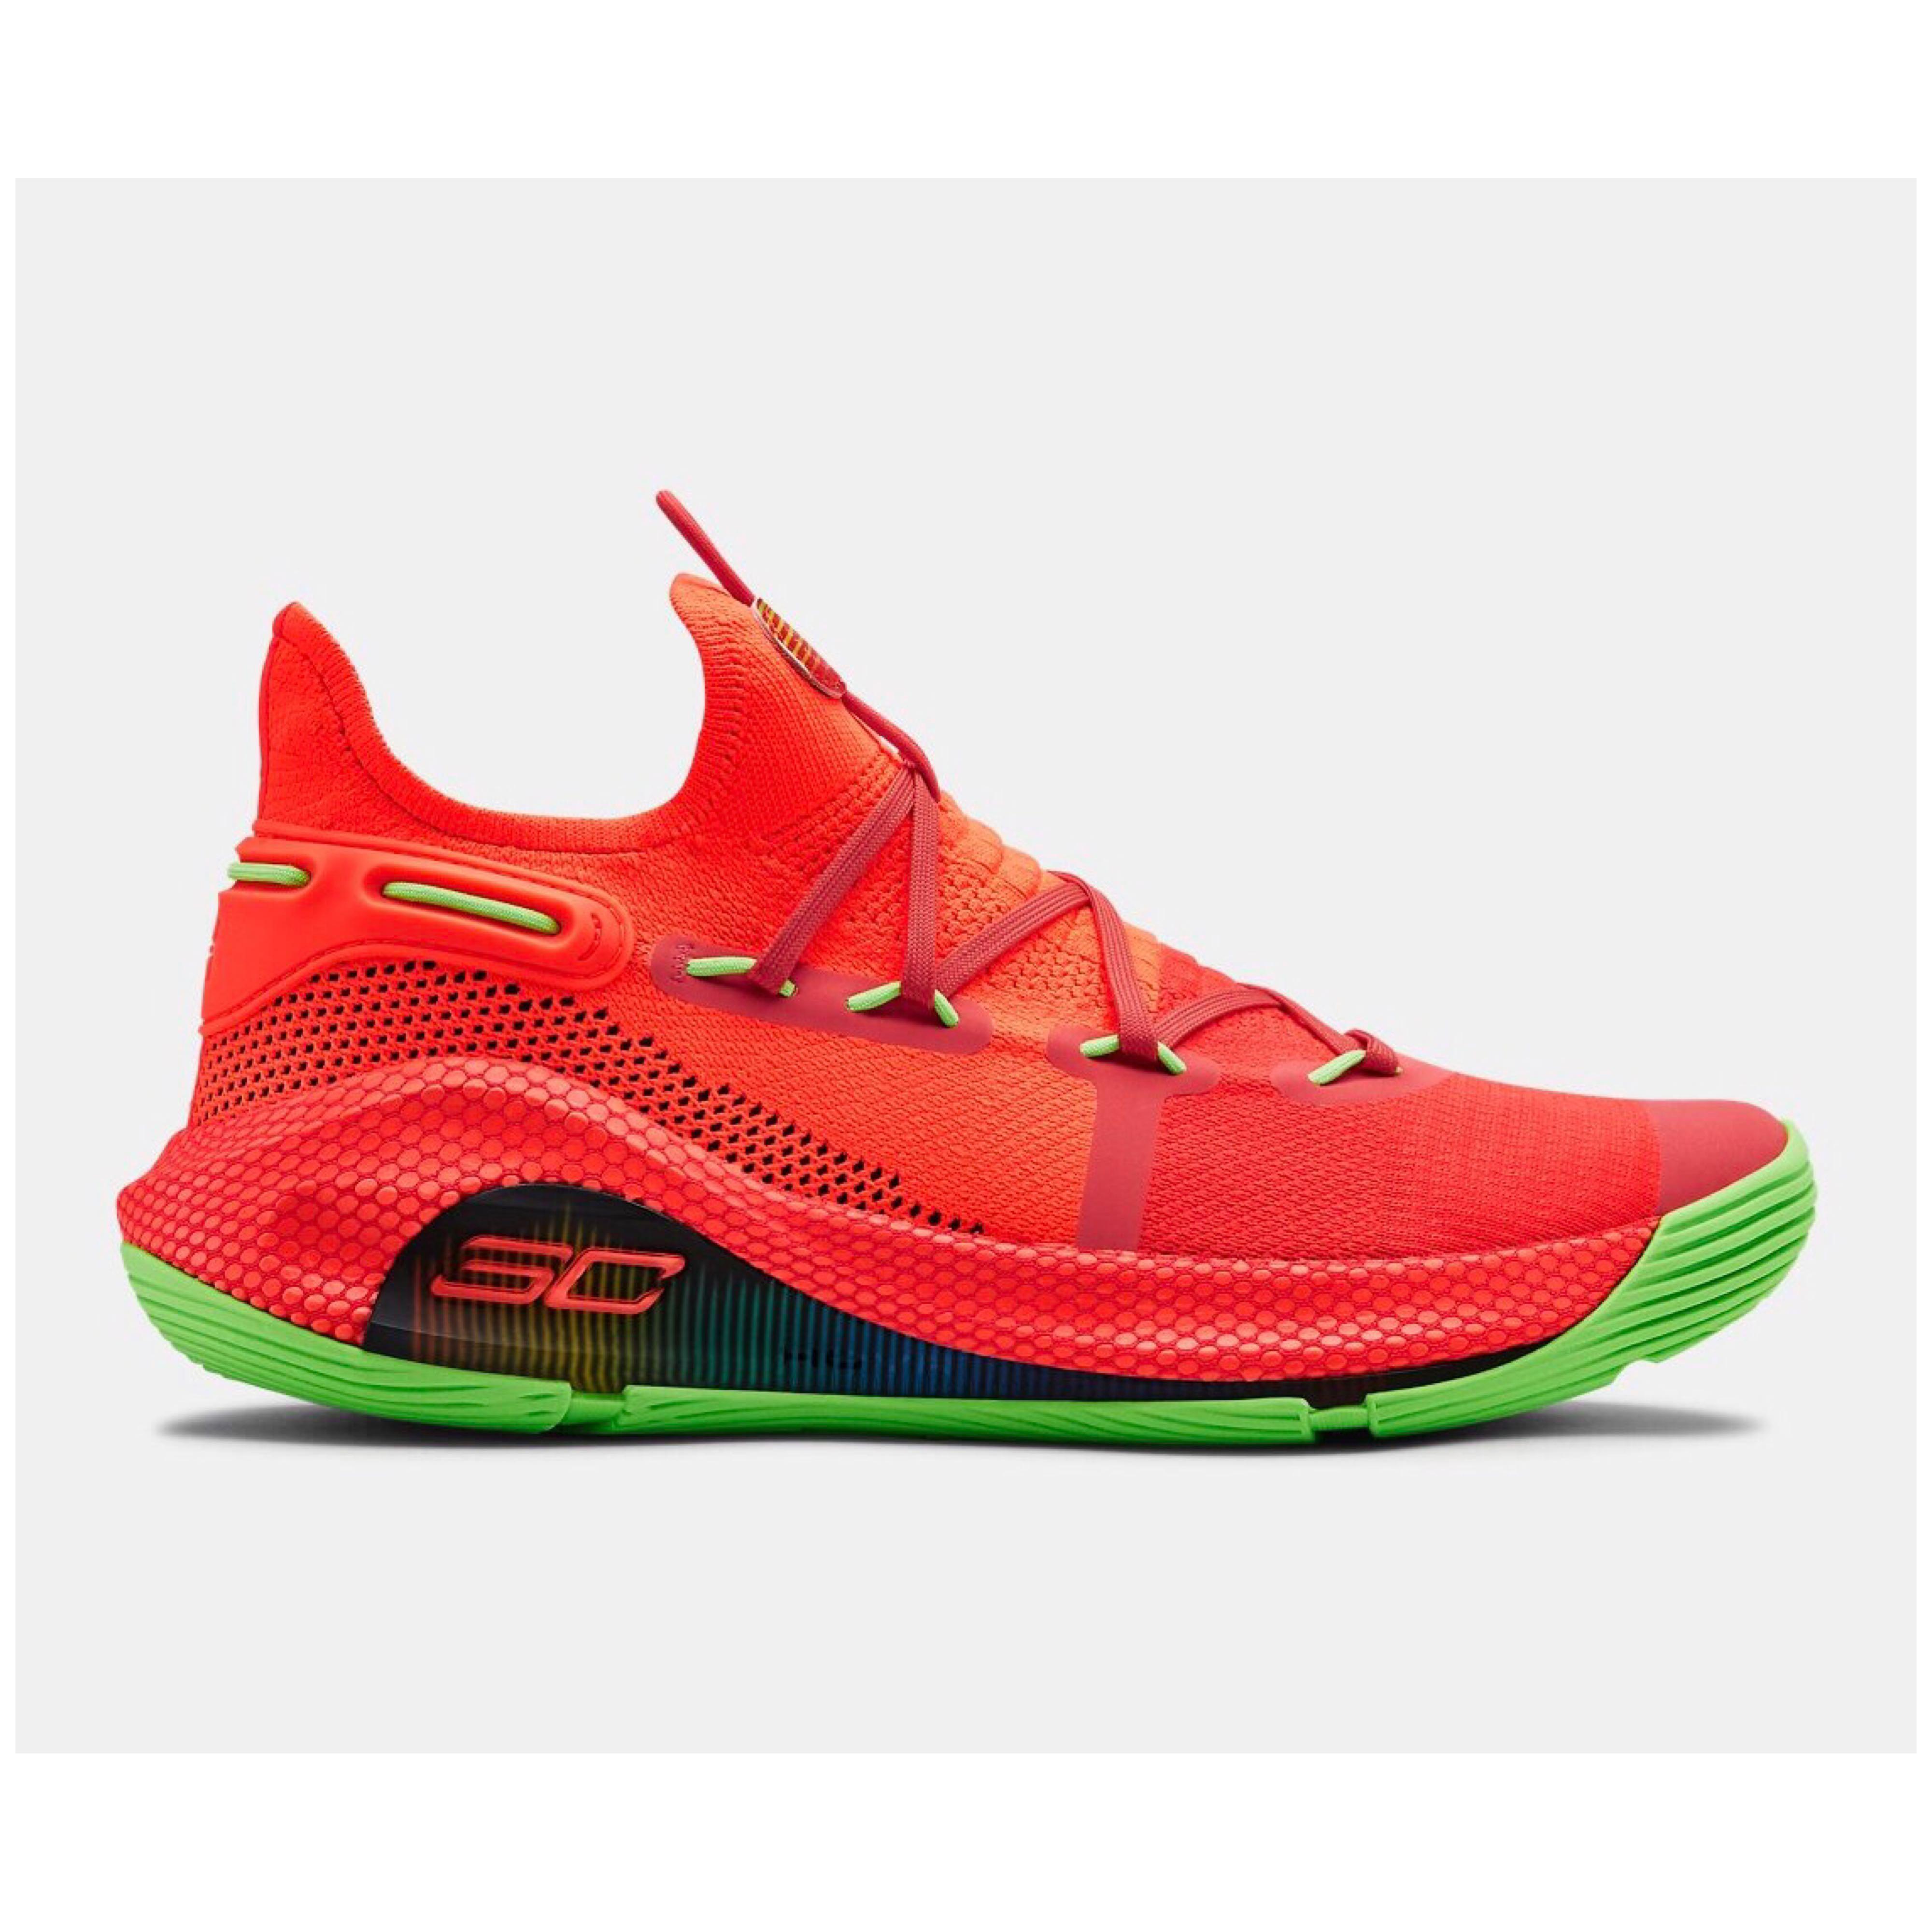 In Stock Men's UA Curry 6 Basketball 